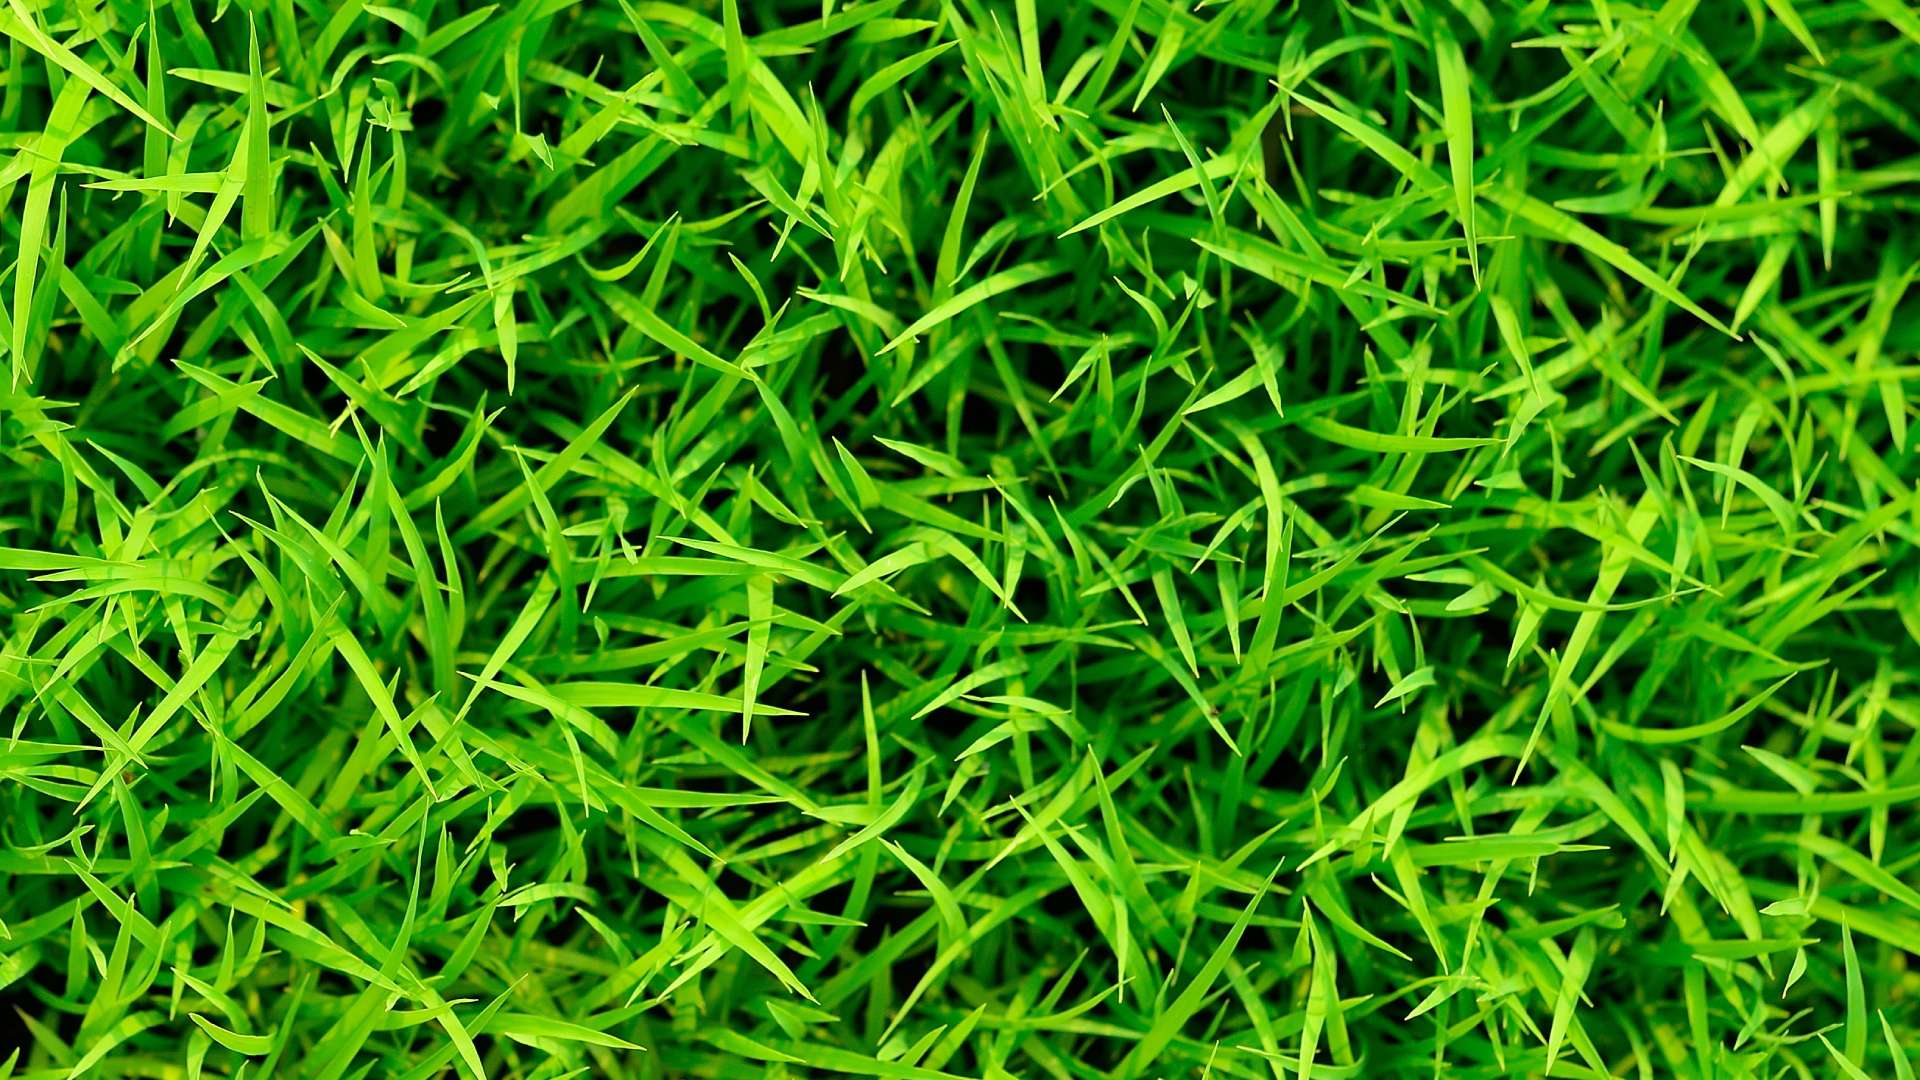 Healthy vibrant green grass blades in Westfield, IN.